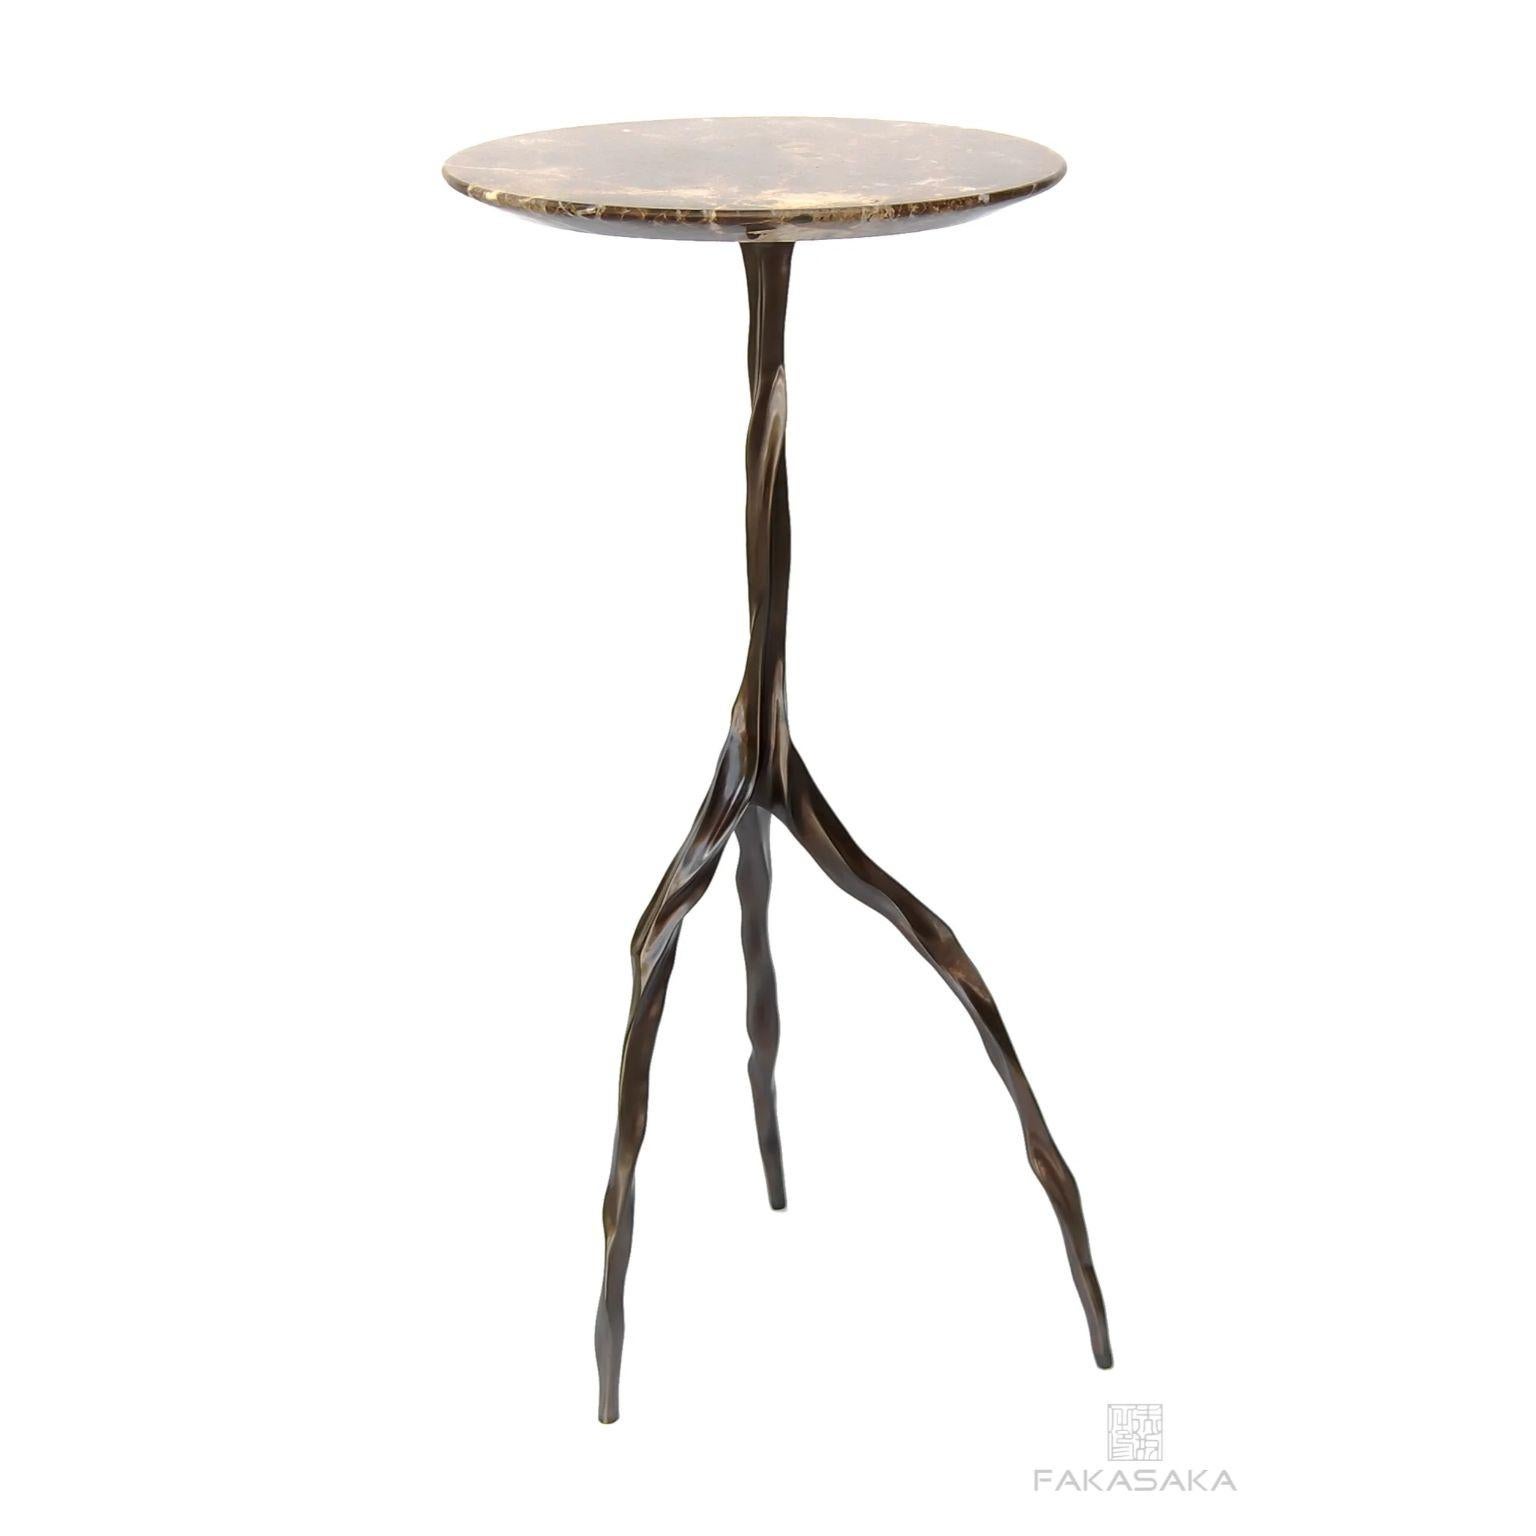 Bronze Nina Drink Table with Marrom Imperial Marble Top by Fakasaka Design For Sale